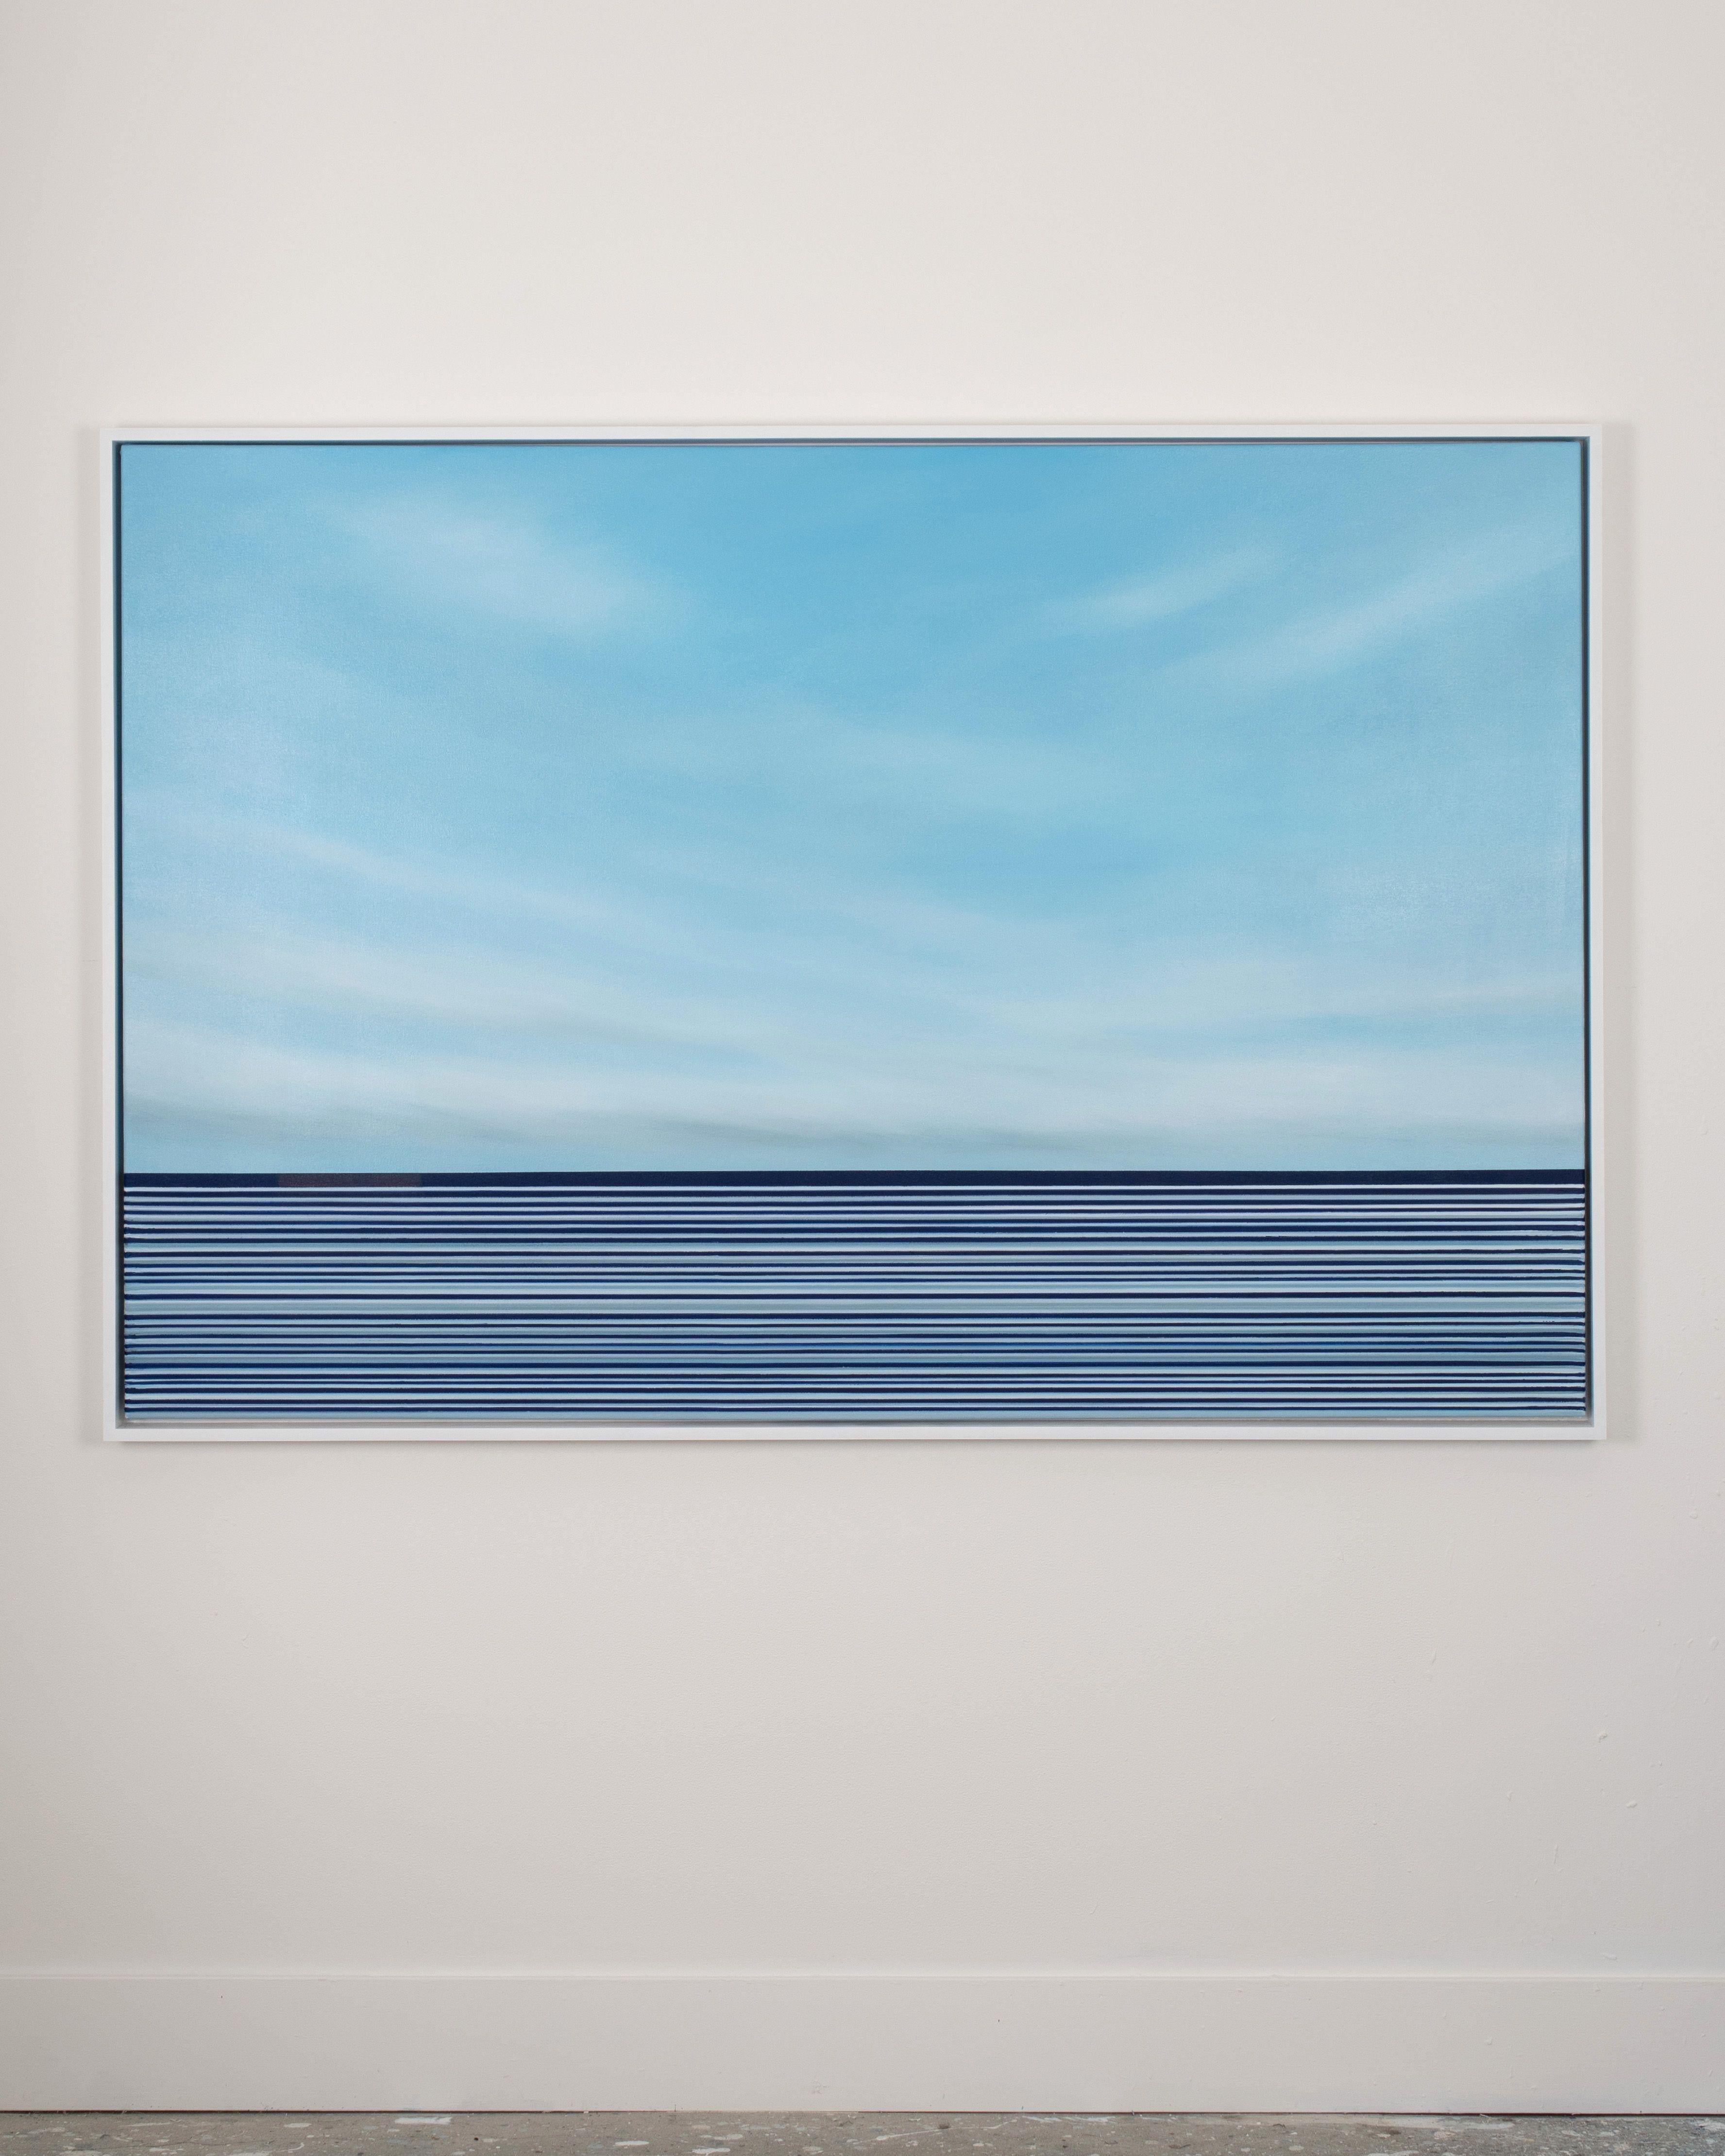 Original minimalist seascape painting. Inspired by the coastline of the Pacific Ocean, with the multiple horizon lines referencing the continuous rhythm of the sea. Oil paint on gallery wrapped canvas, with the sides of the painting finished as a